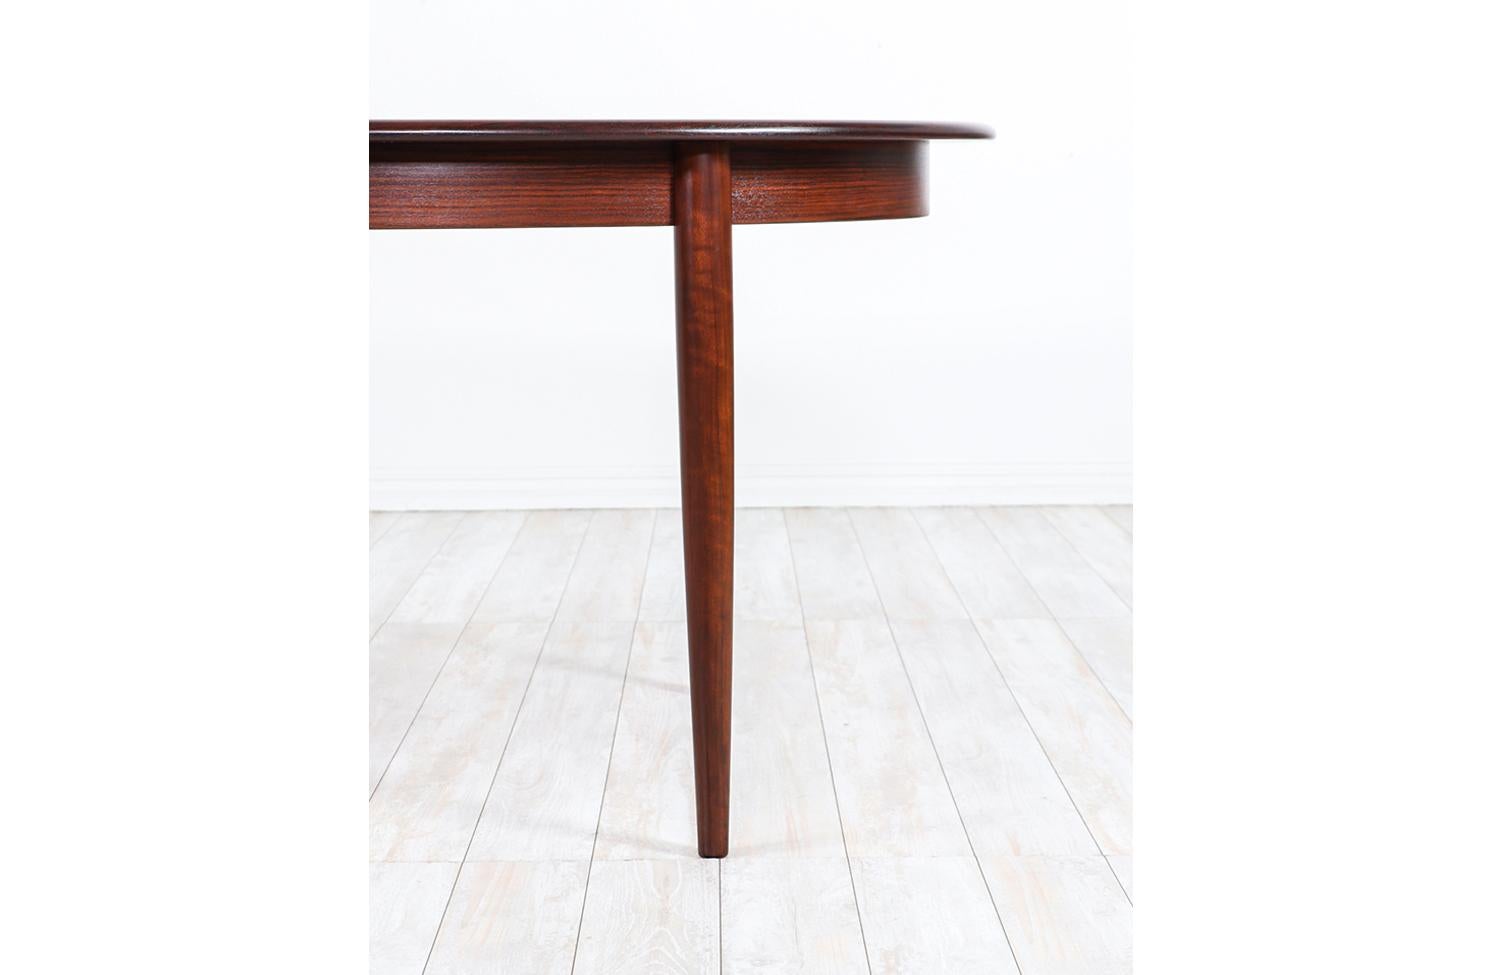 Danish Modern Expanding Rosewood Dining Table by Gudme Møbelfabrik 1